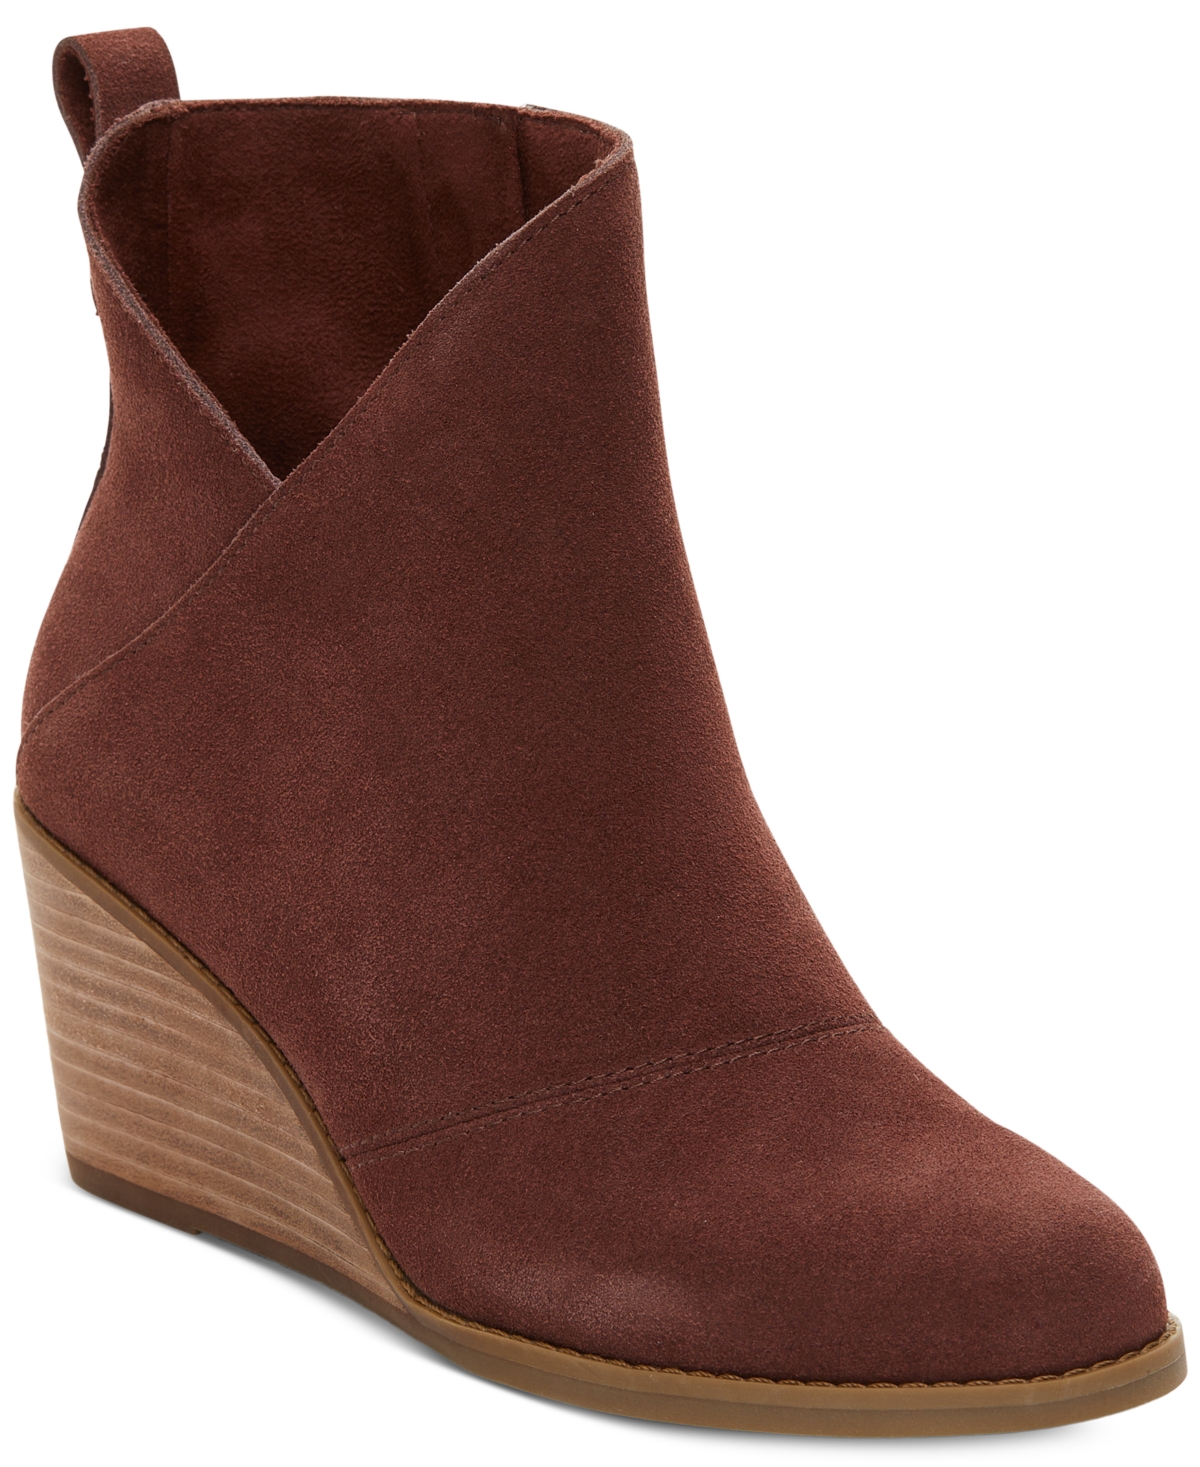 Toms Women's Sutton Asymmetrical Cutout Wedge Booties In Chestnut Suede